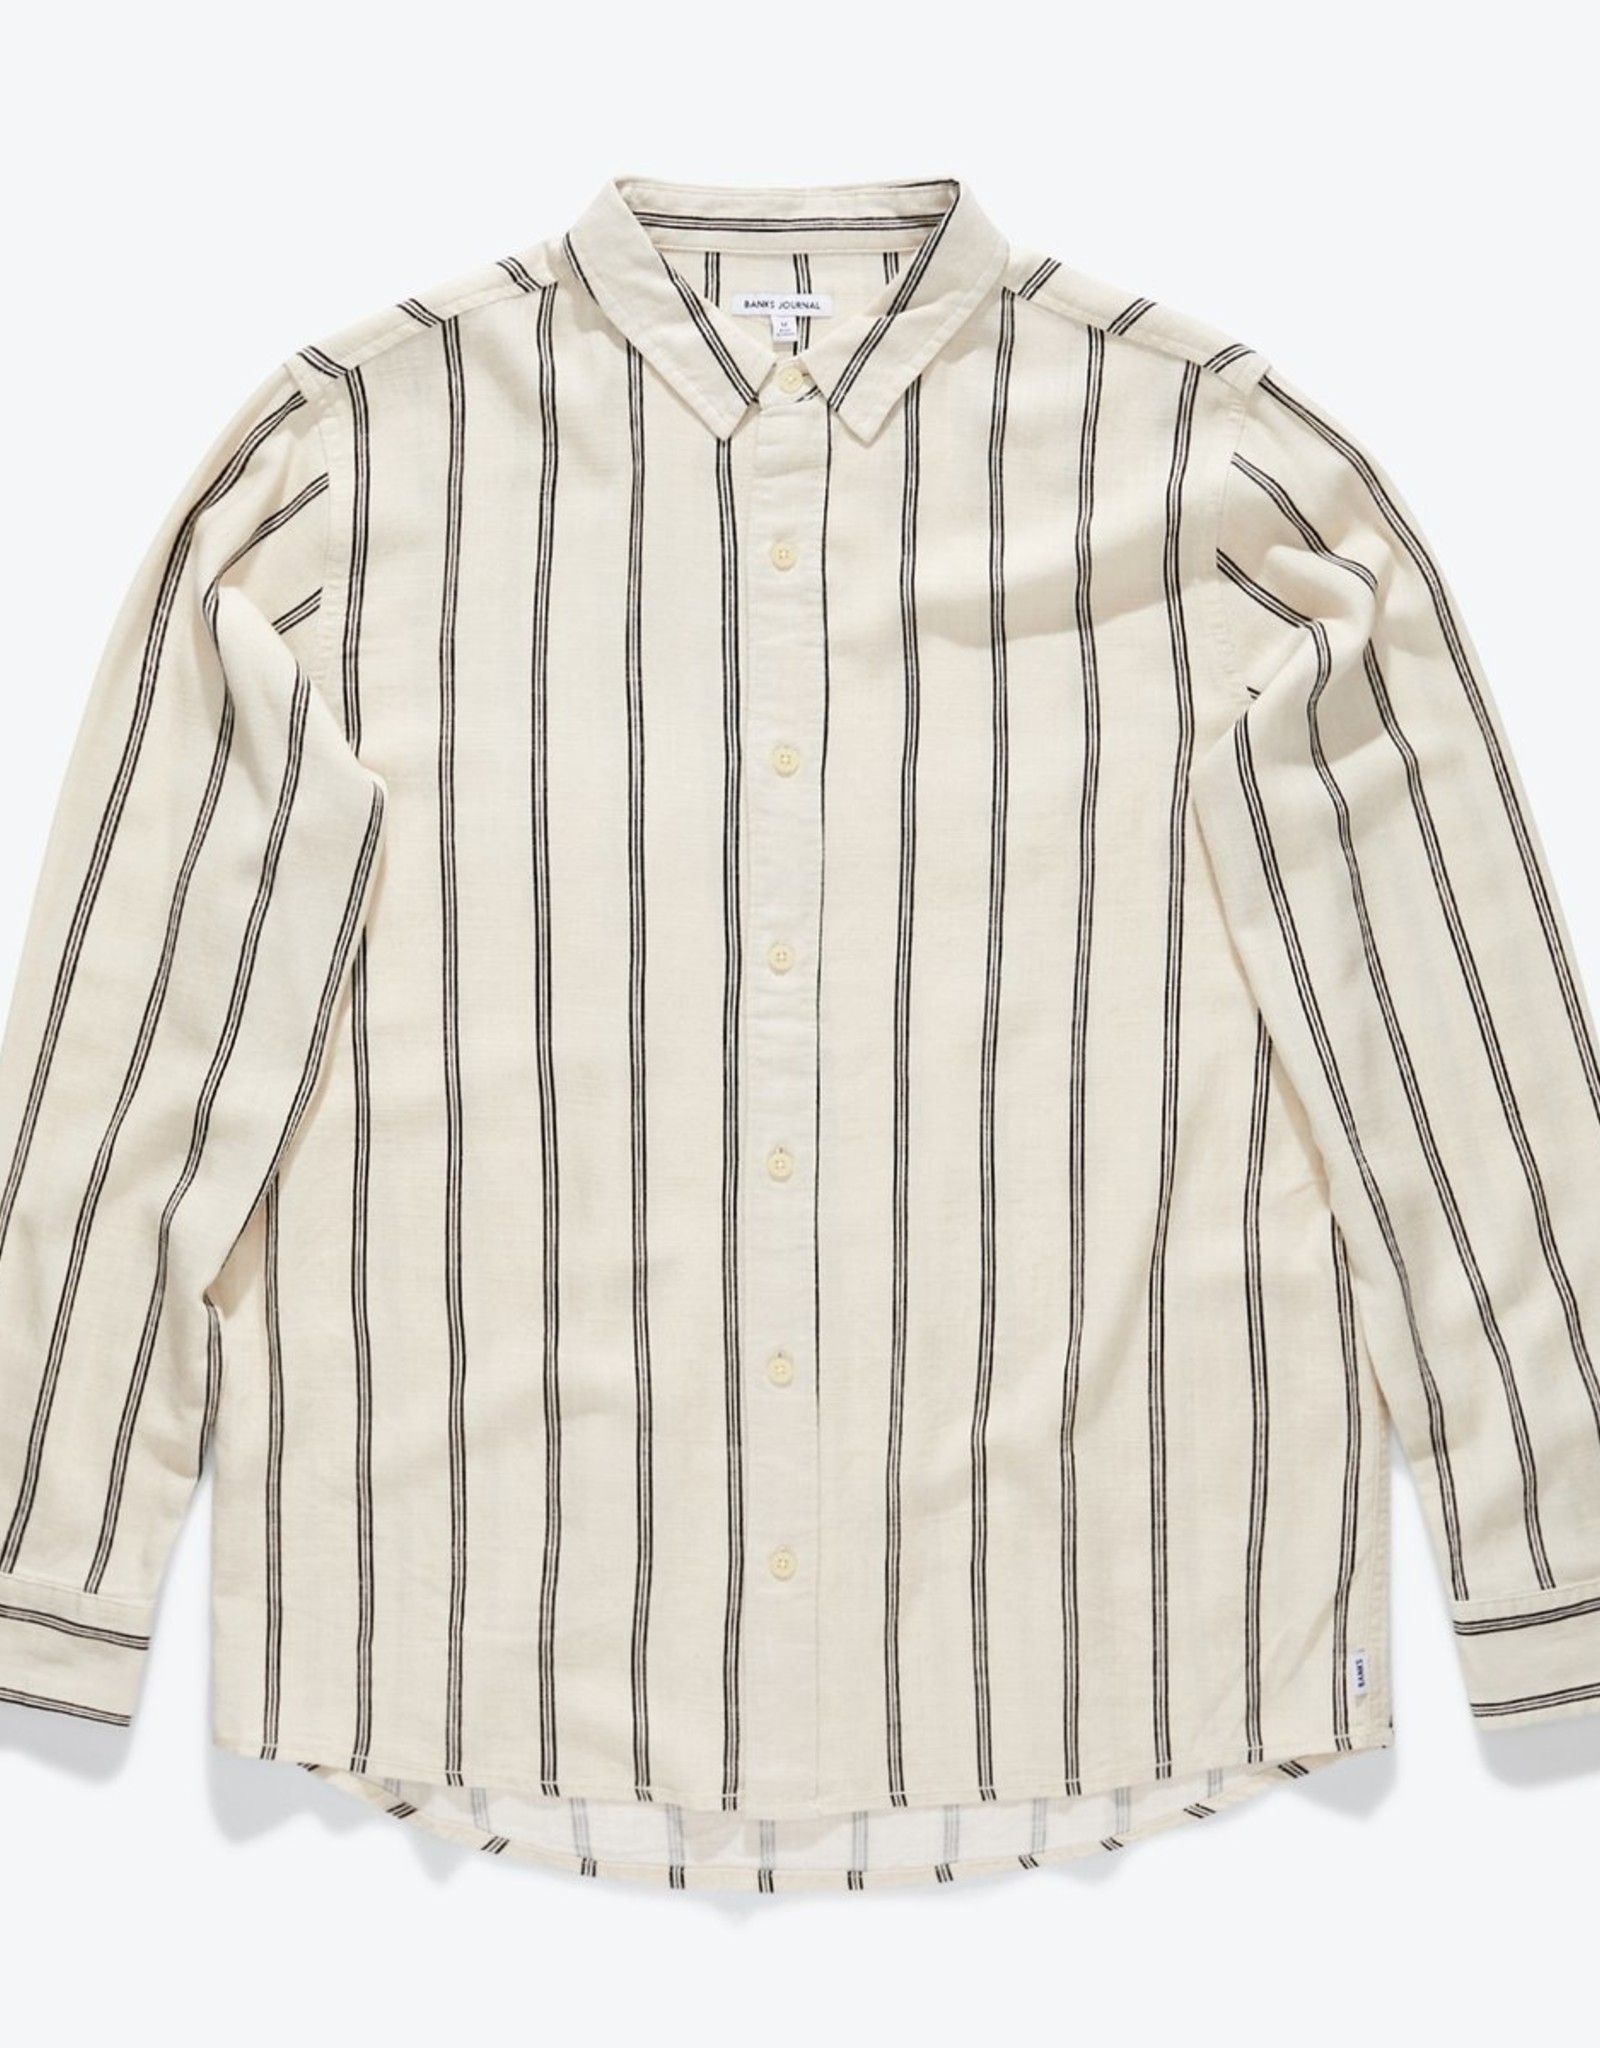 Harvest L/S Shirt - UnTied On Woodward